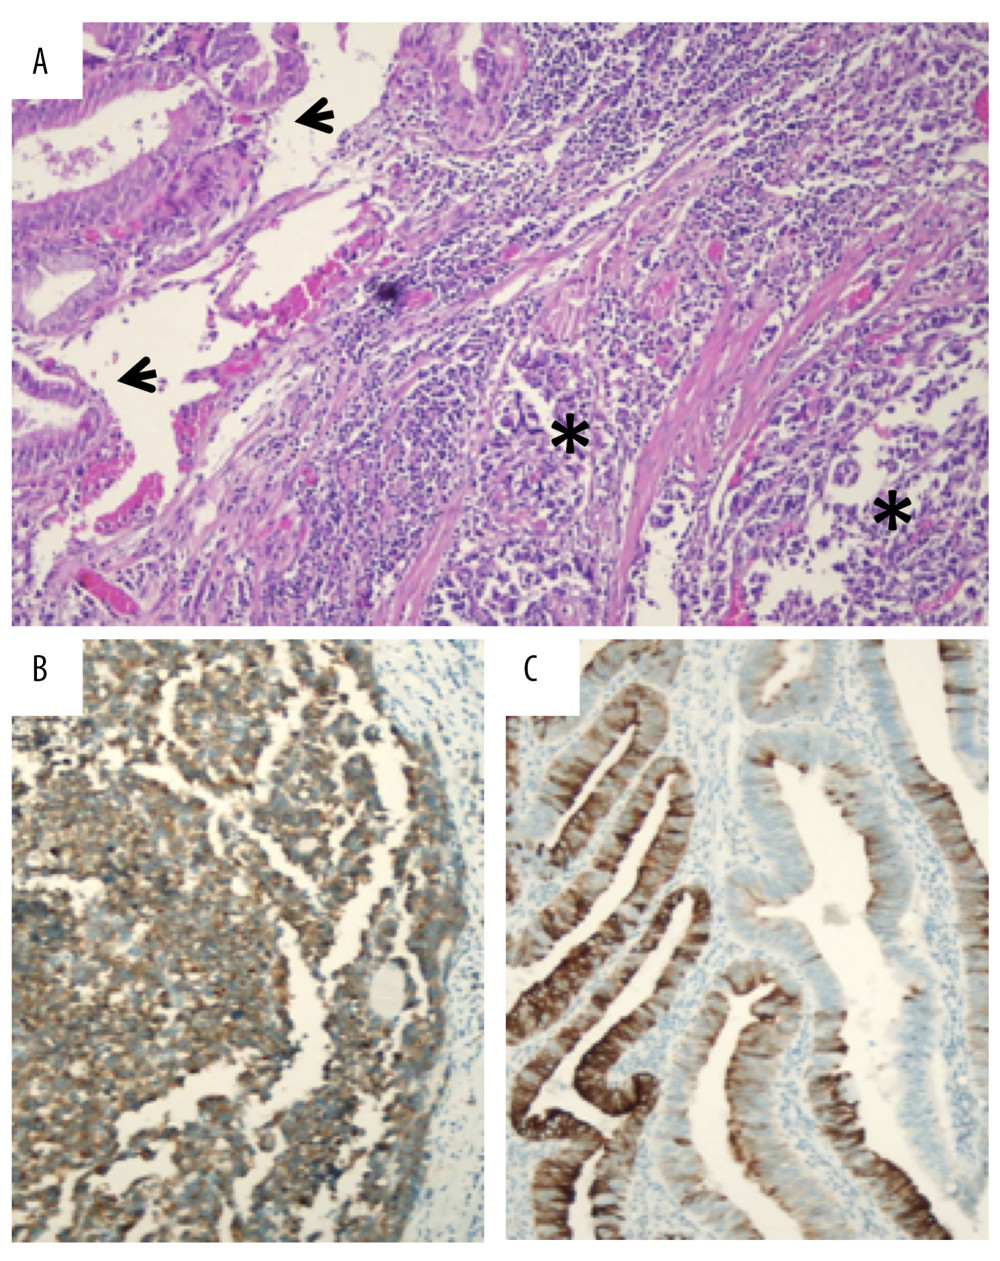 Mixed adenoneuroendocrine carcinoma of the gallbladder stained with Hematoxylin and Eosin (H&E): adenocarcinomatous (arrow) and neuroendocrine (*) components (A); immunohistochemical (IHC) staining for CgA in the neuroendocrine portion (B) and CK7 (SP52) in the adenocarcinomatous portion (C).